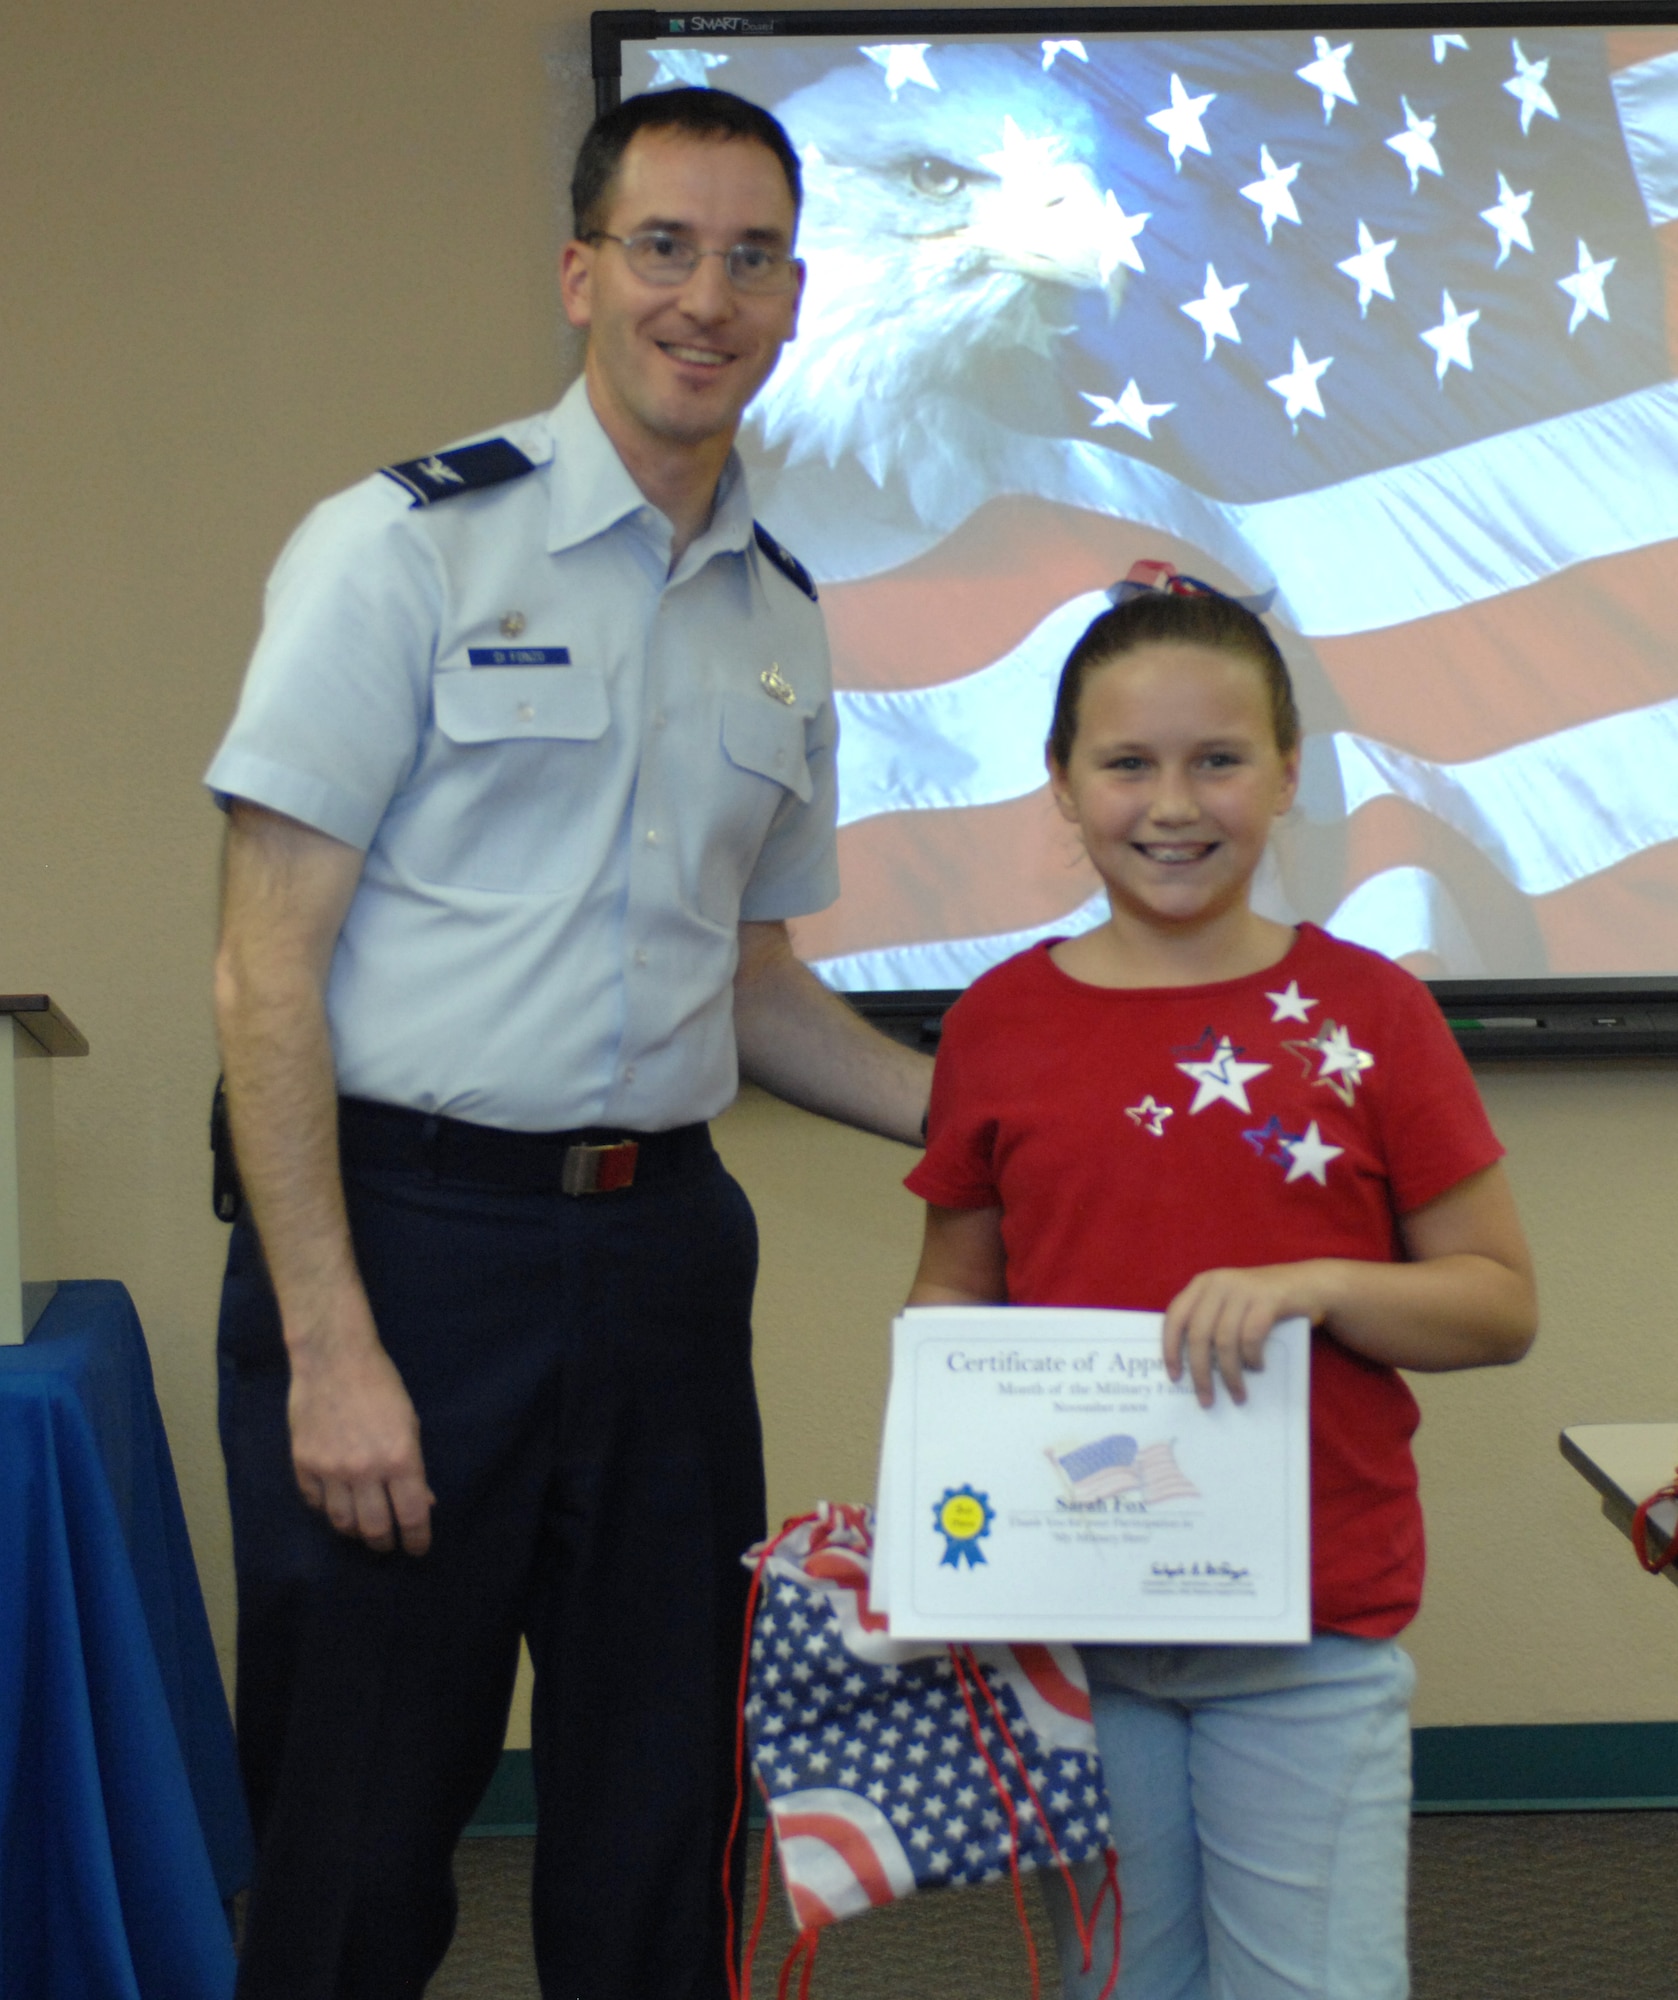 Col. Stephen DiFonzo, 49th Mission Support Group commander, presents an award to Sarah Fox for winning 3rd place in the 7 - 12 year old category of the drawing contest at the Airman and Family Readiness Center at Holloman Air Force Base, N.M., Nov. 24. The theme for the drawing contest was "My Military Hero" in support of Military Family Appreciation Month. (U.S. Air Force photo/Airman Sondra M. Escutia)